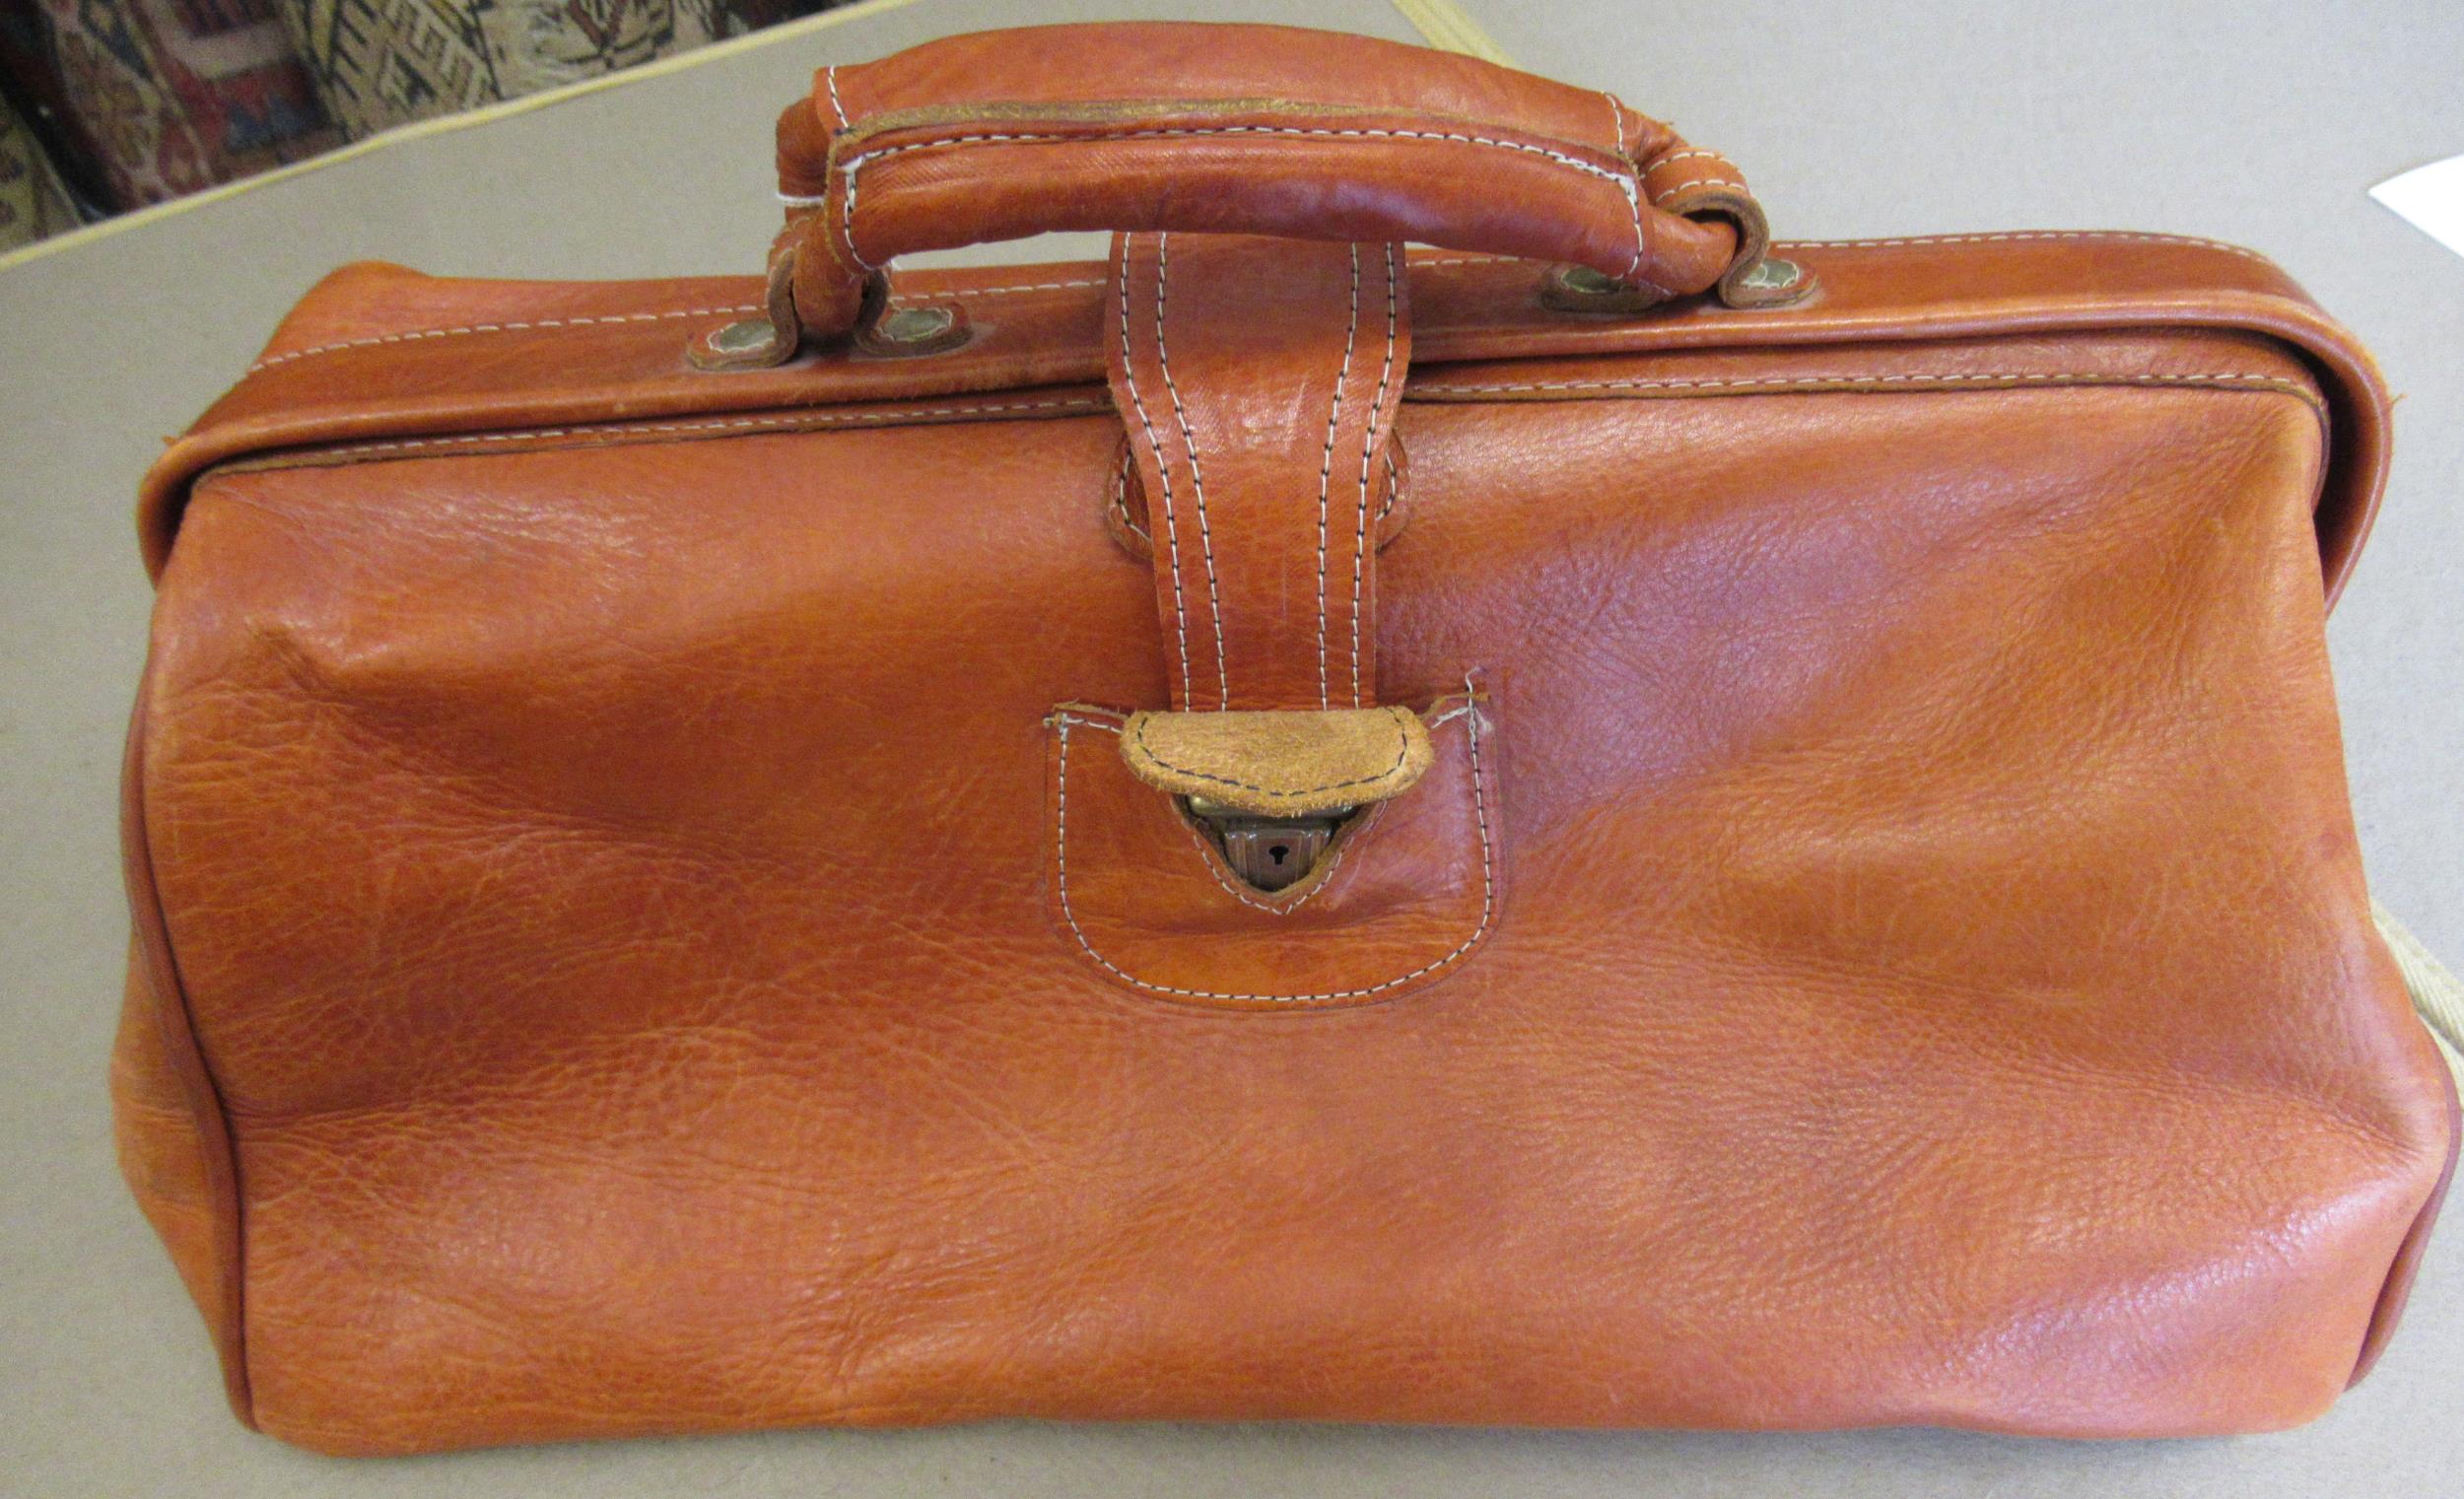 Tan leather attaché case by Piquadro, together with another leather briefcase Condition as shown - Image 2 of 17